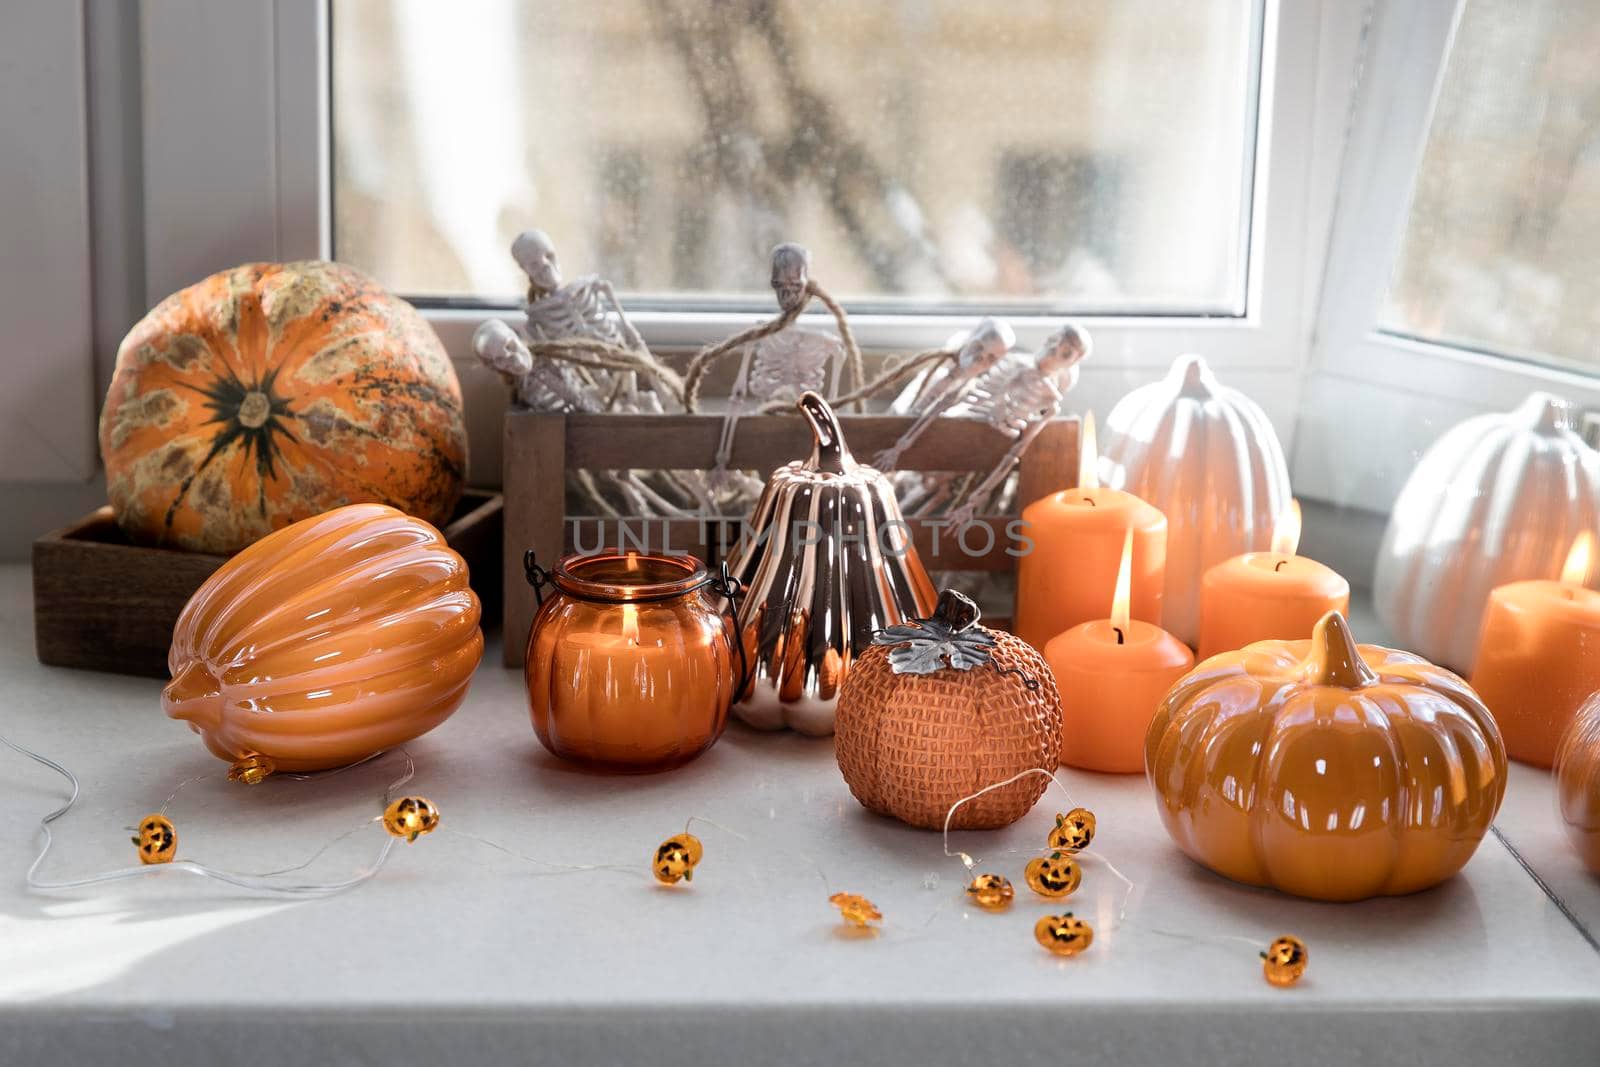 Porcelain and natural pumpkins, orange candles on a white table, Halloween decorations.